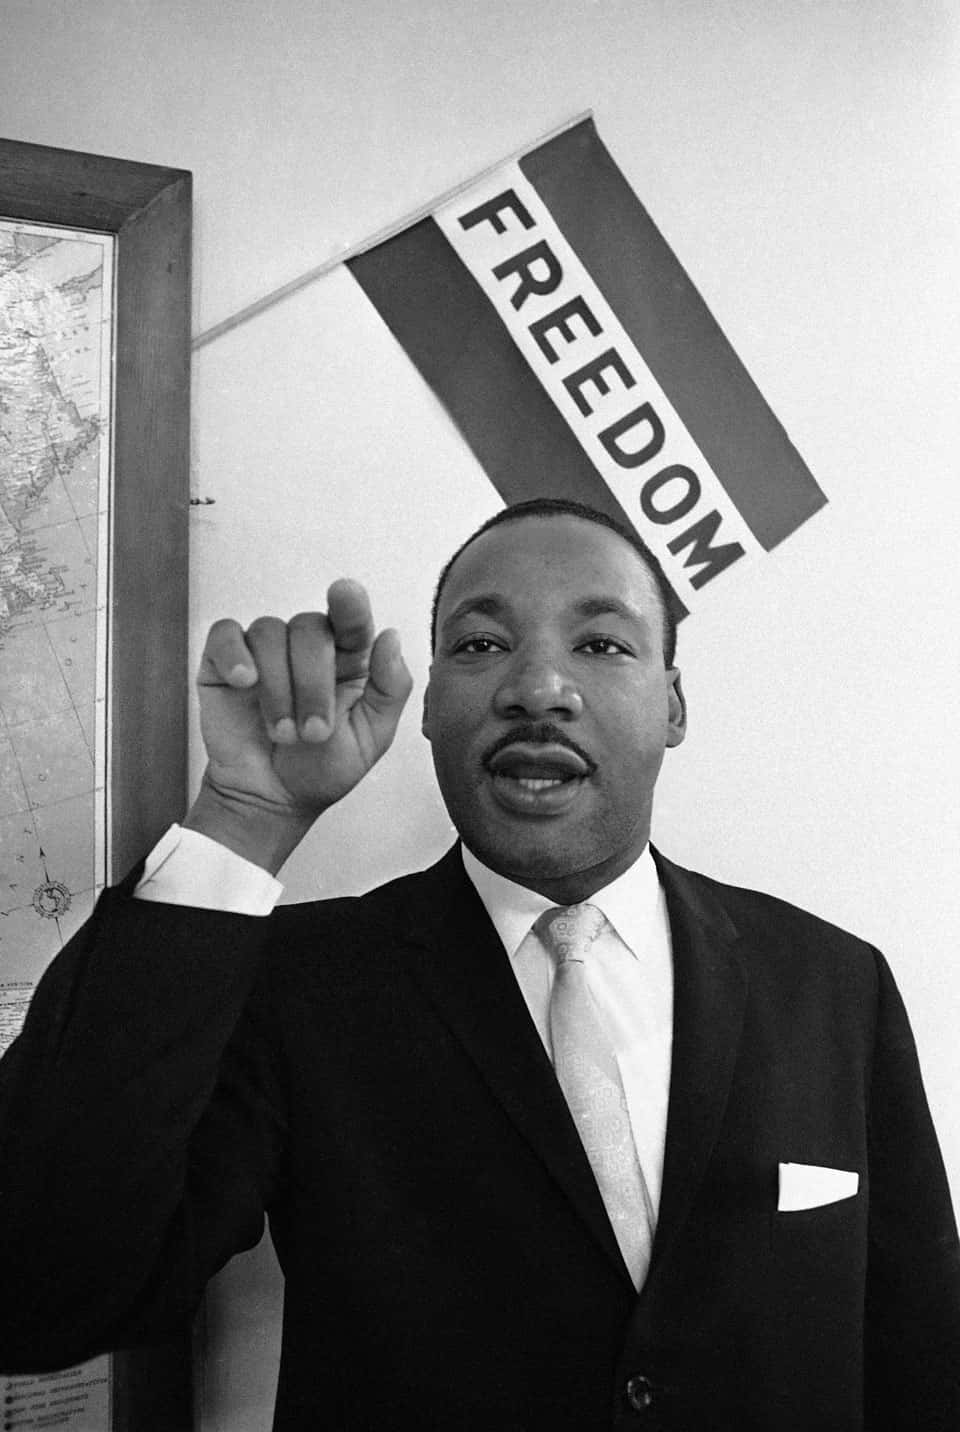 The late civil rights activist Martin Luther King Jr. fighting for equal and justice in America